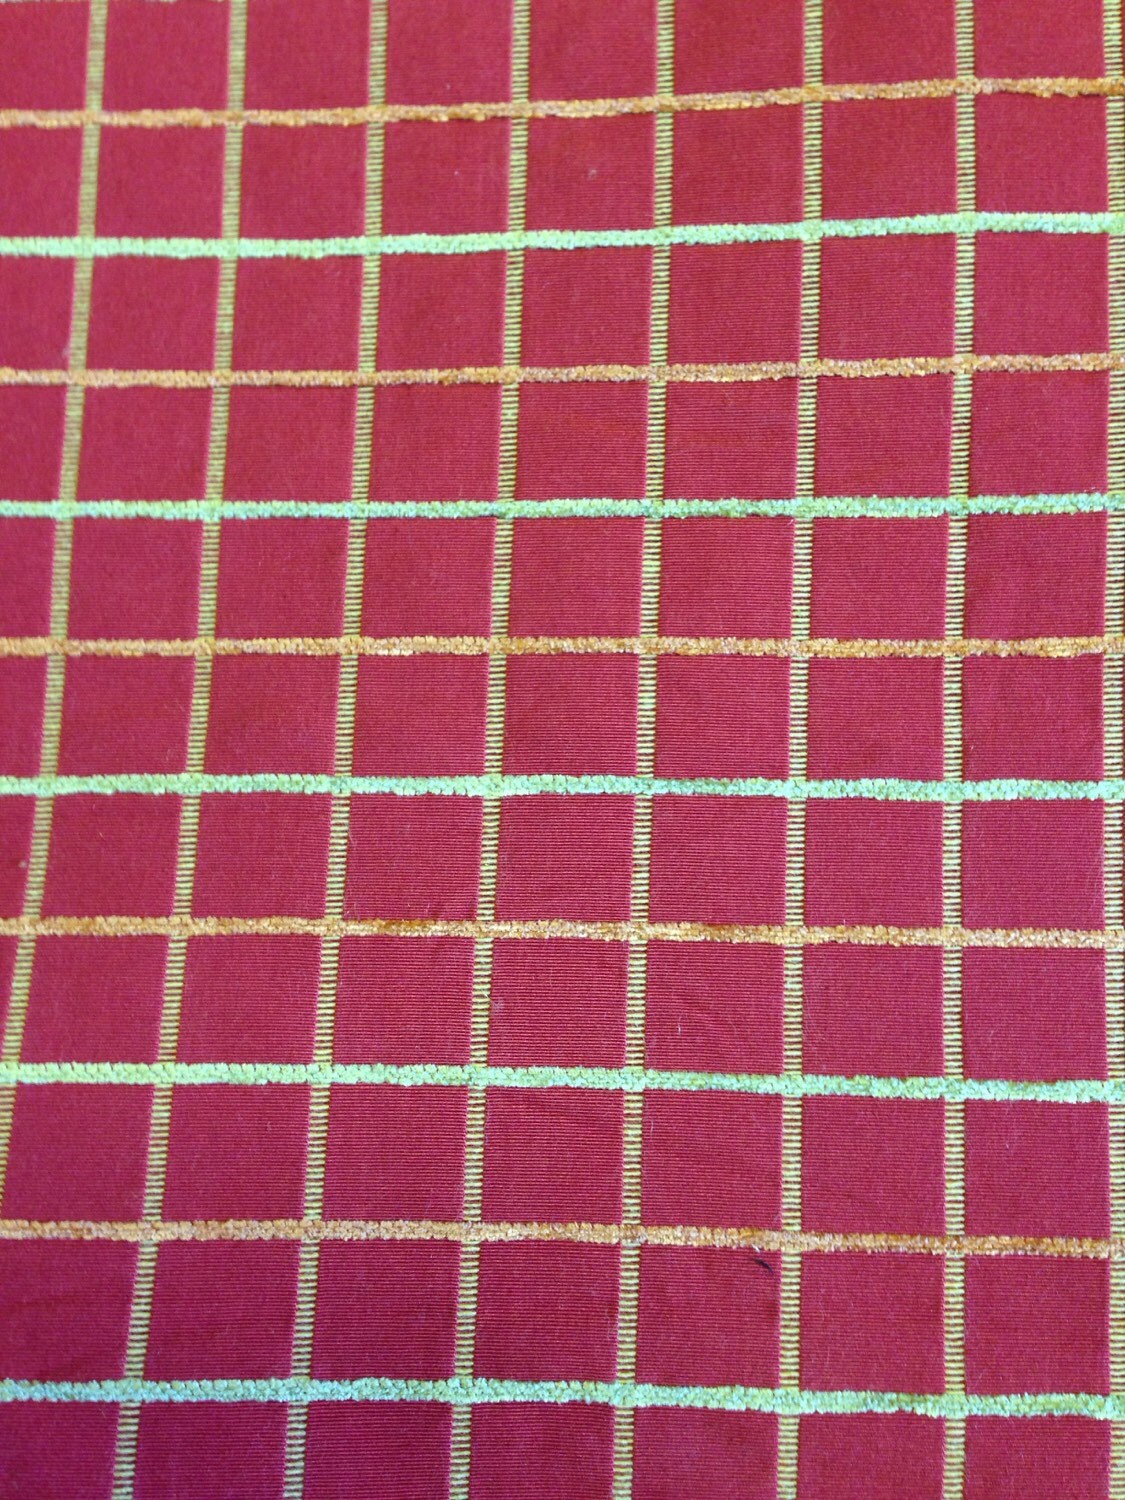 Red Green and Yellow Check Upholstery Fabric Fabric By The | Etsy